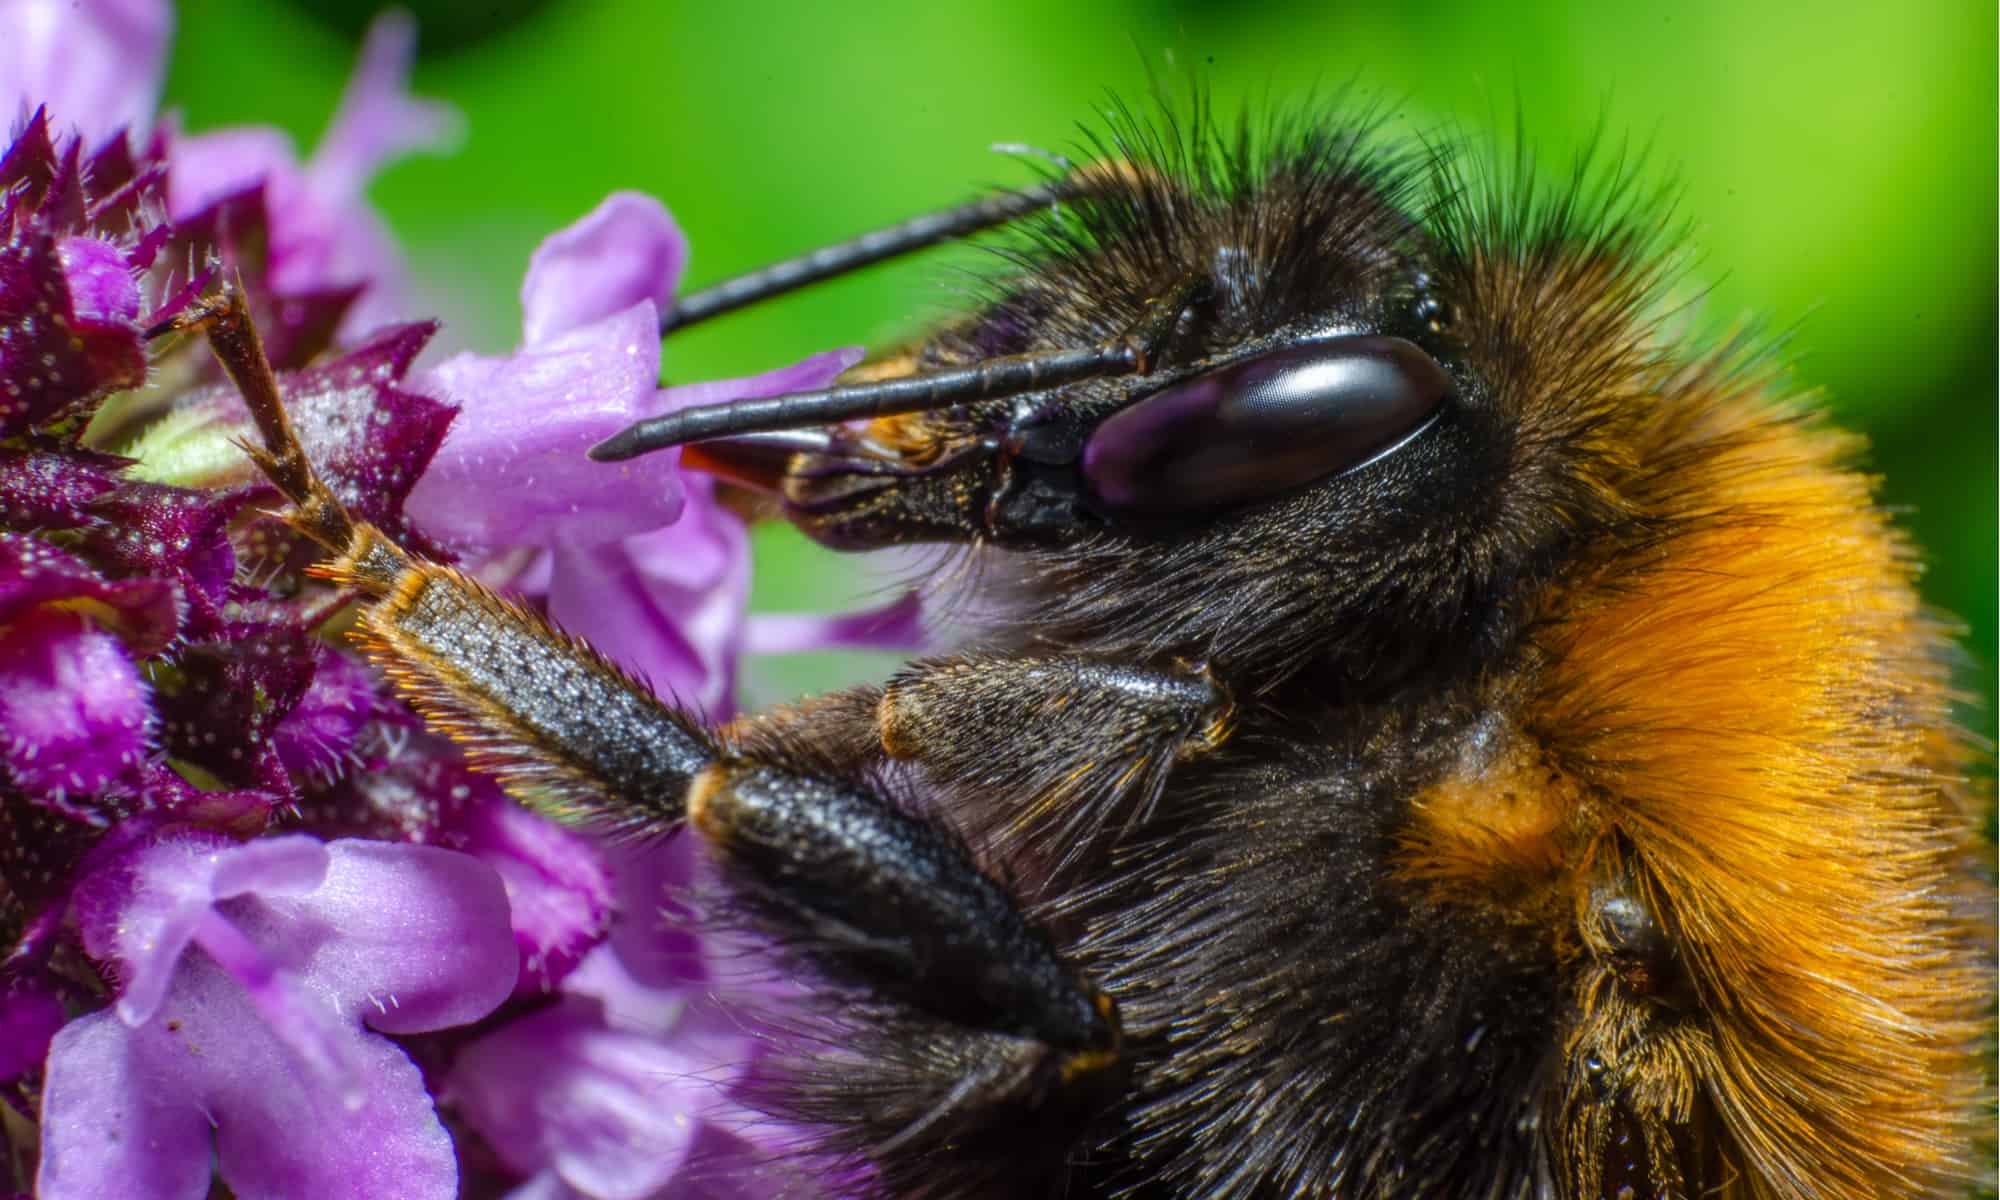 Are Bumble Bees Dangerous? - A-Z Animals